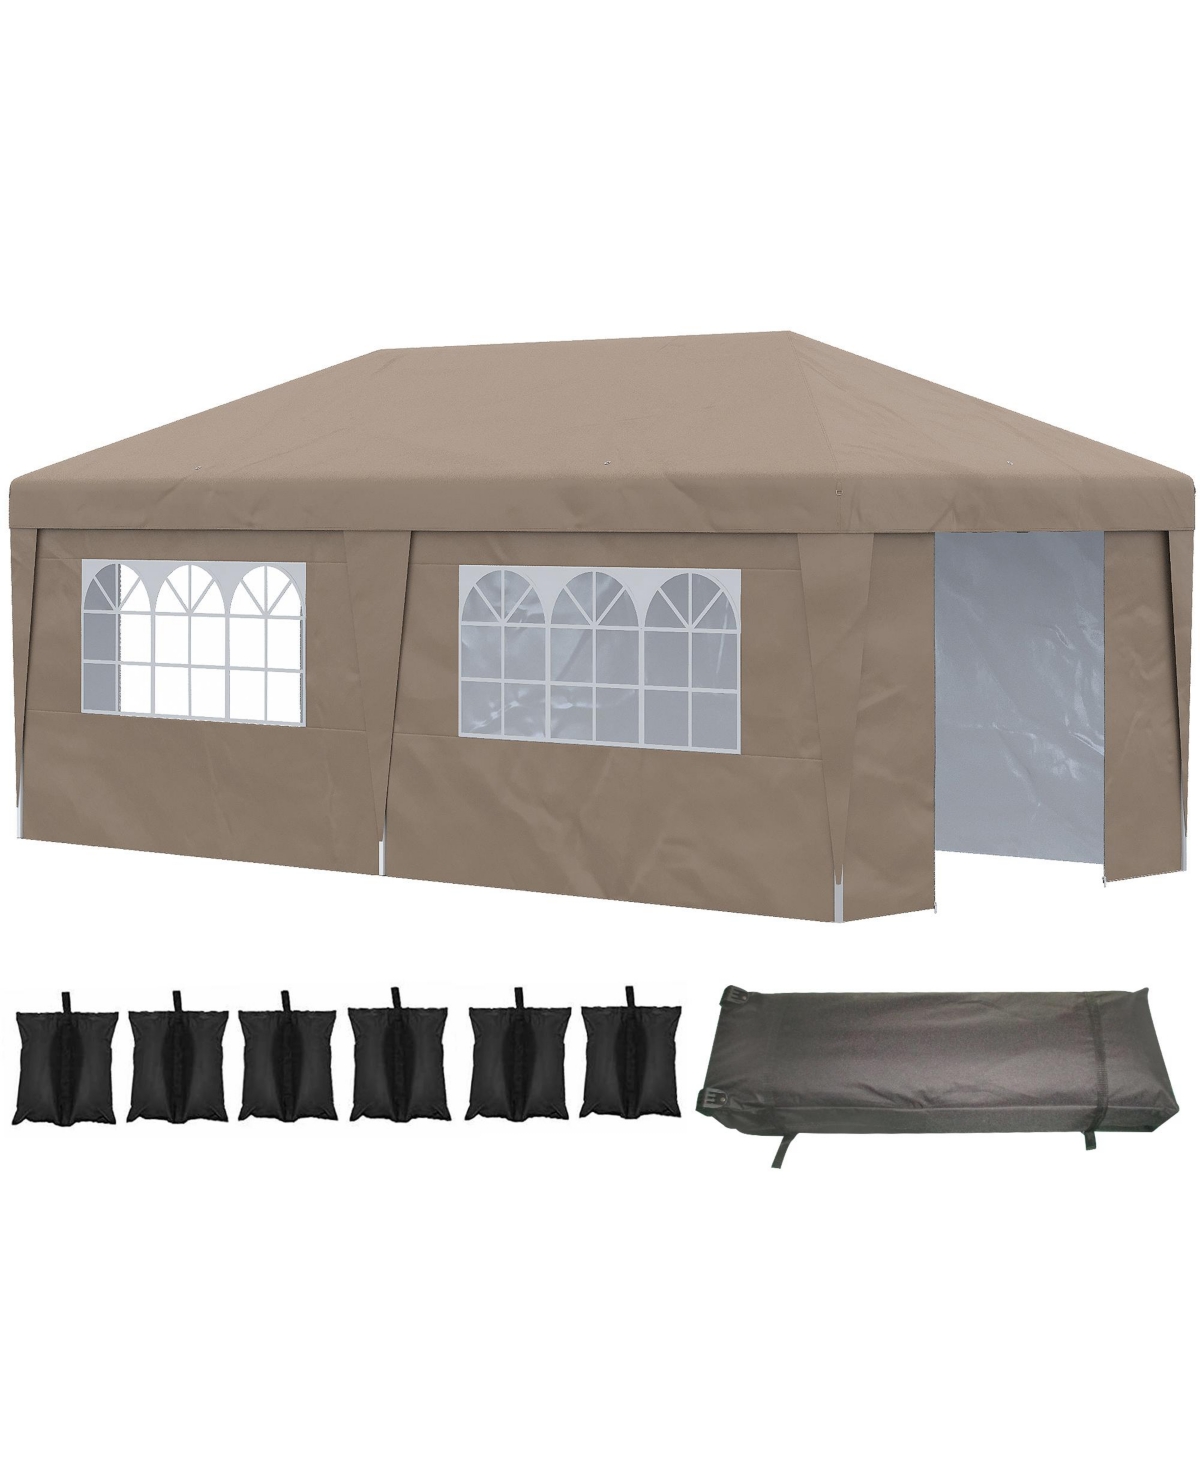 10' x 20' Pop Up Canopy Tent with Sidewalls, Height Adjustable Large Party Tent Event Shelter with Leg Weight Bags, Double Doors and Wheeled